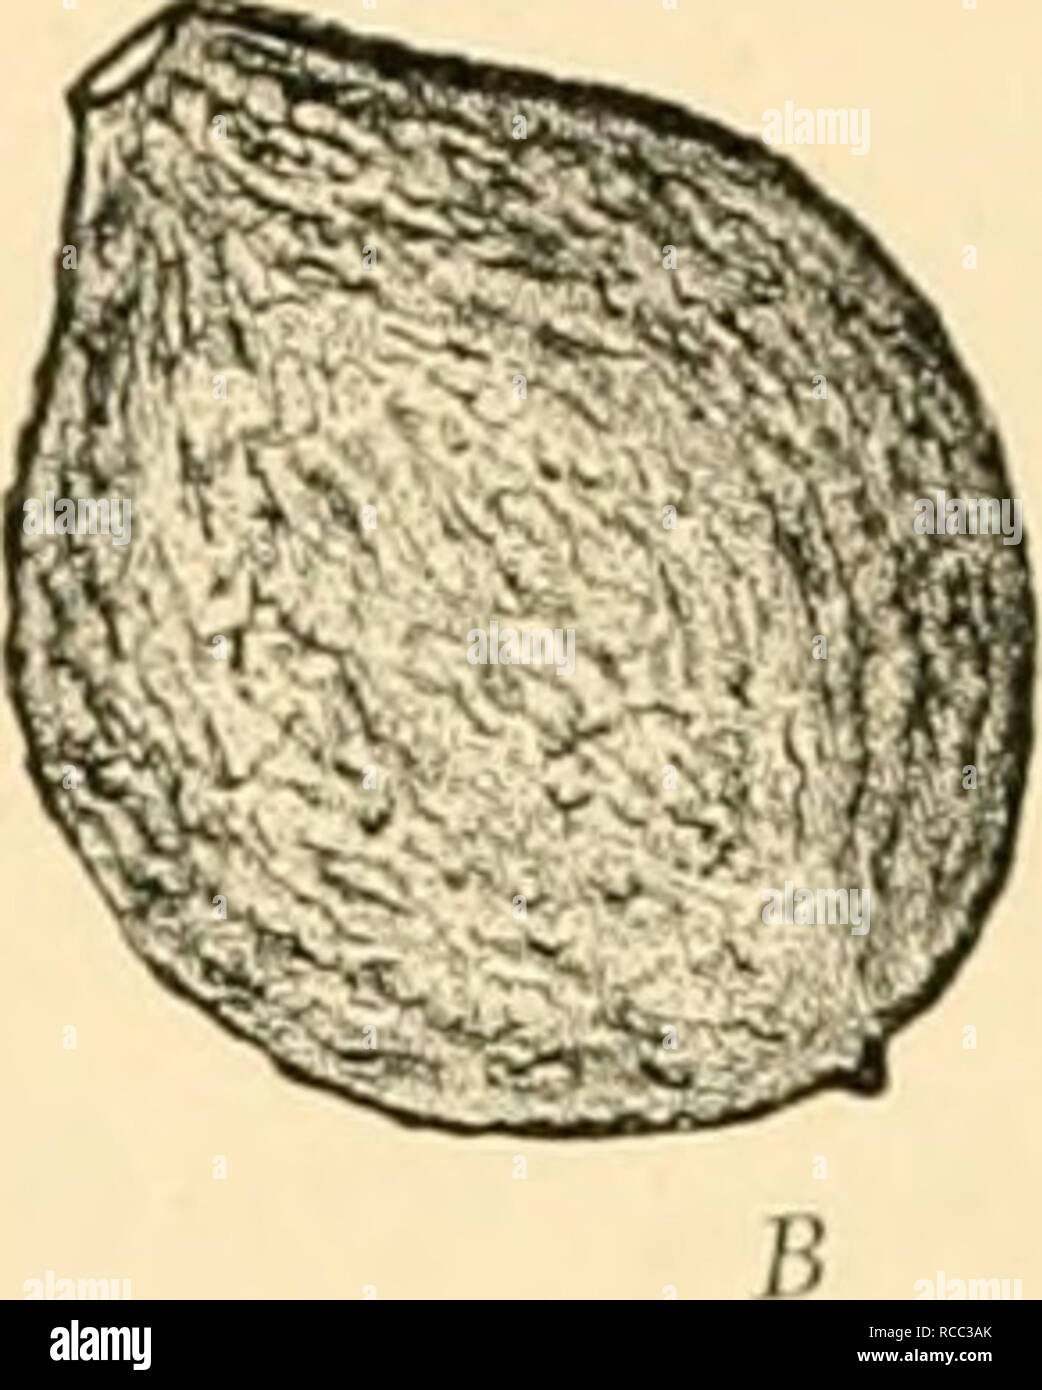 . Diseases of plants induced by cryptogamic parasites; introduction to the study of pathogenic Fungi, slime-Fungi, bacteria, &amp; Algae. Plant diseases; Parasitic plants; Fungi. Fig. 30C—MoHilia fructigena more or less concentric lines, attack, (v. Tubeuf del.) A, Apple showing the grey conidial patches as S, Young Peach, slnivelled up in consequence of next spring, when the fruit is again moist, further conidia are given off'. Infection takes place by wounds or even through the epidermis of young leaves and blossoms. The conidia have. Please note that these images are extracted from scanned Stock Photo